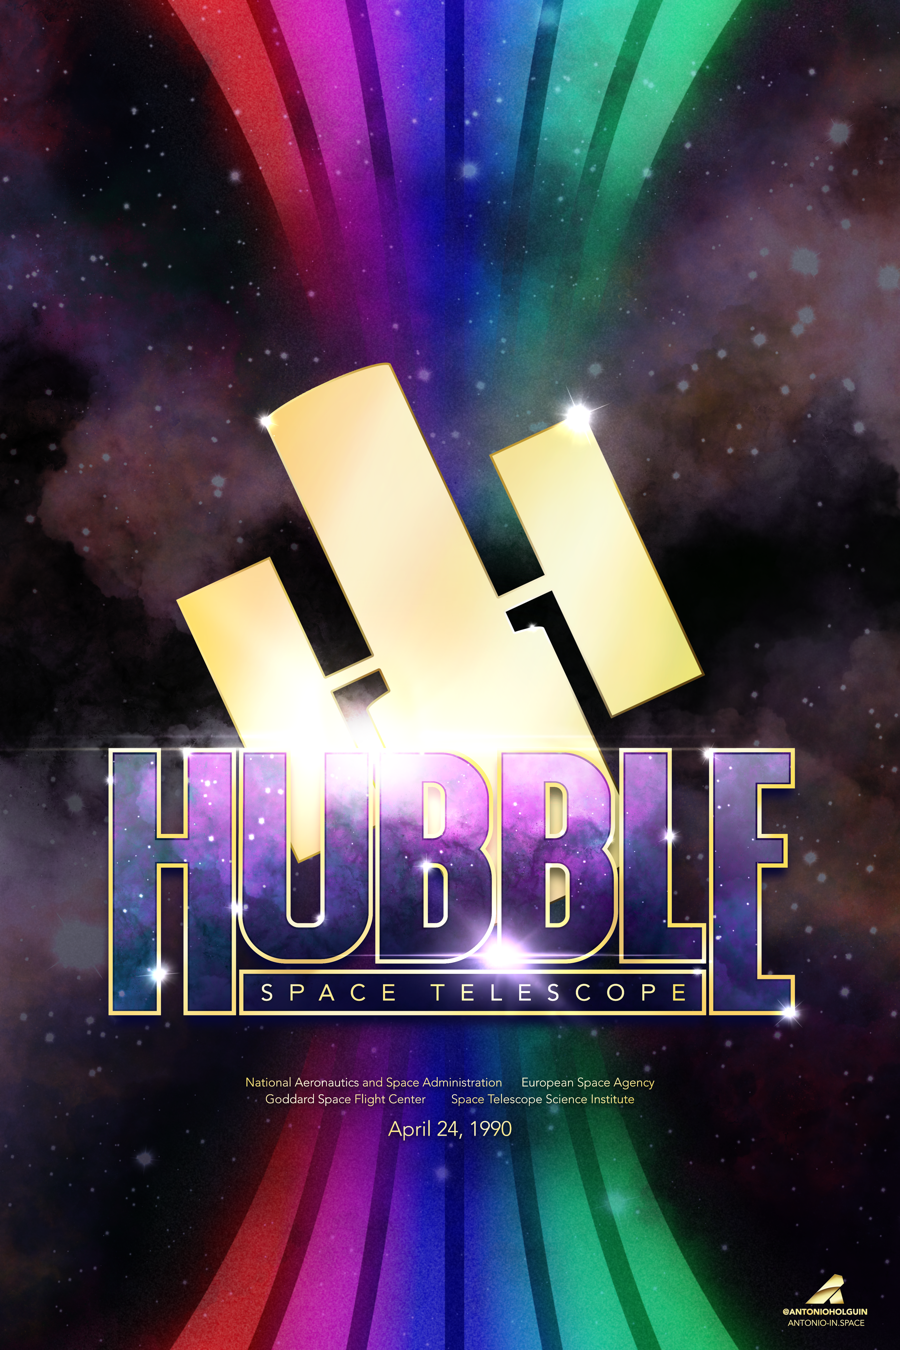 hubble space telescope posters